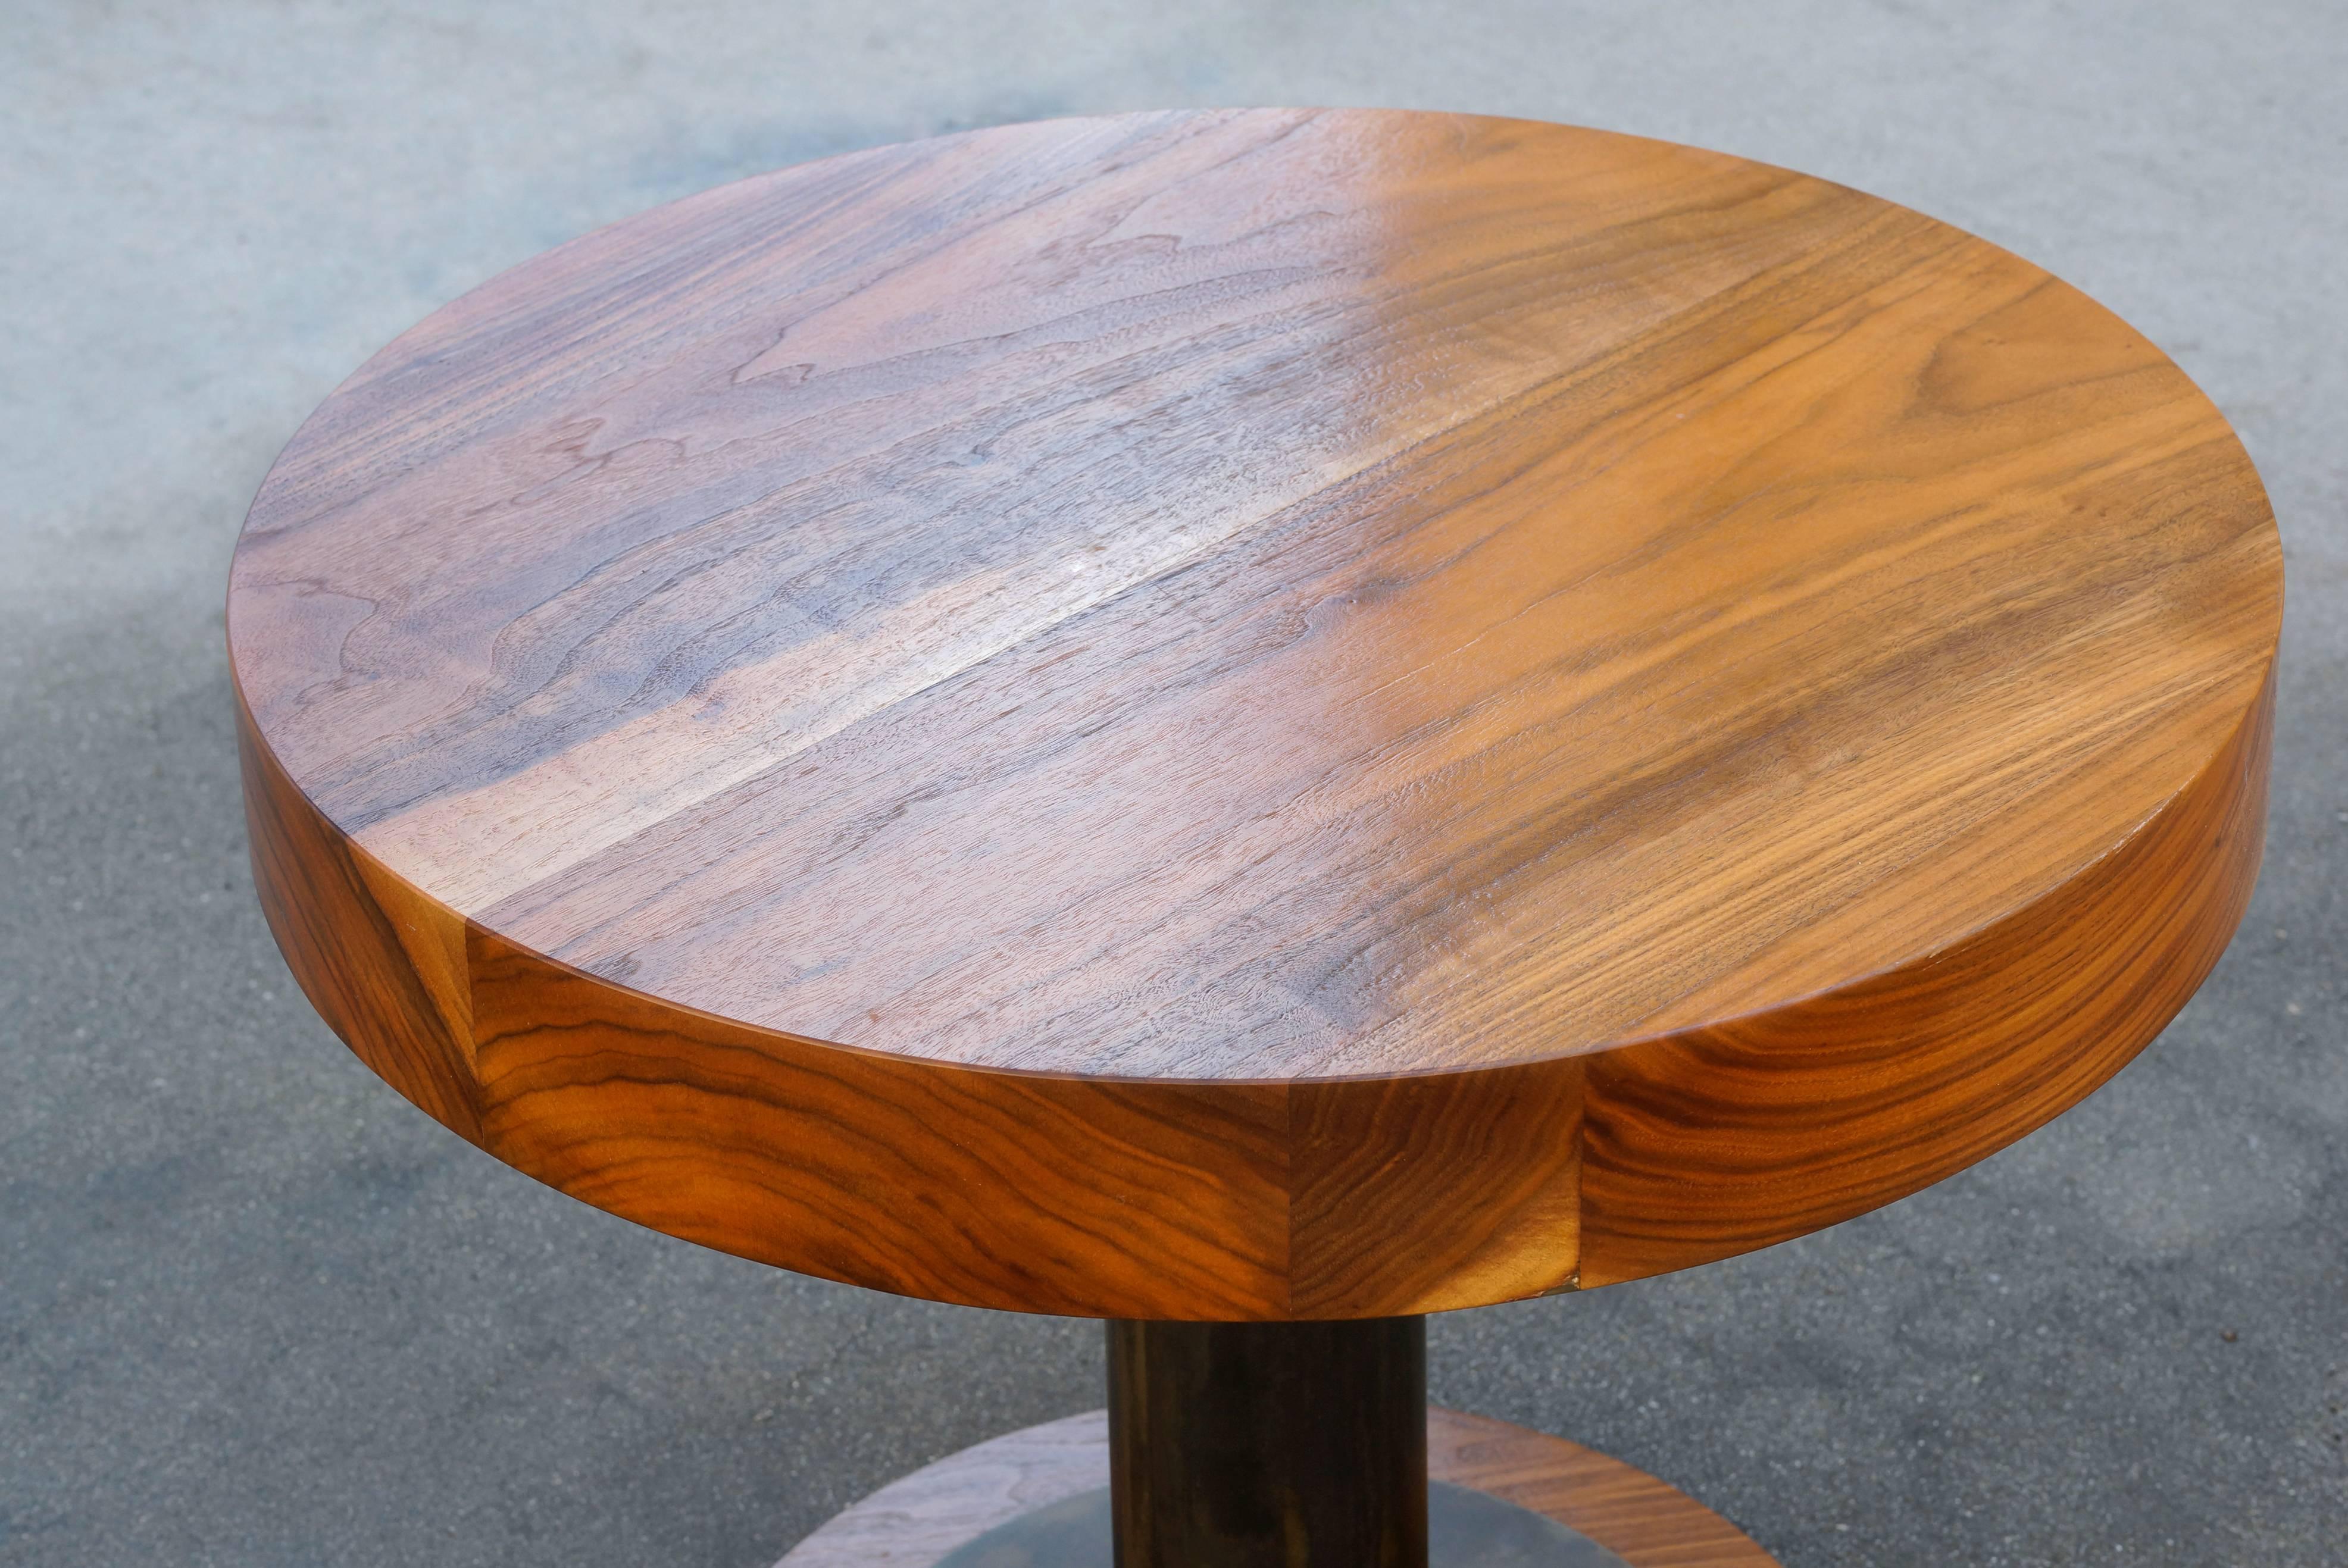 This gorgeous wood and steel table is composed of a lacquered 3